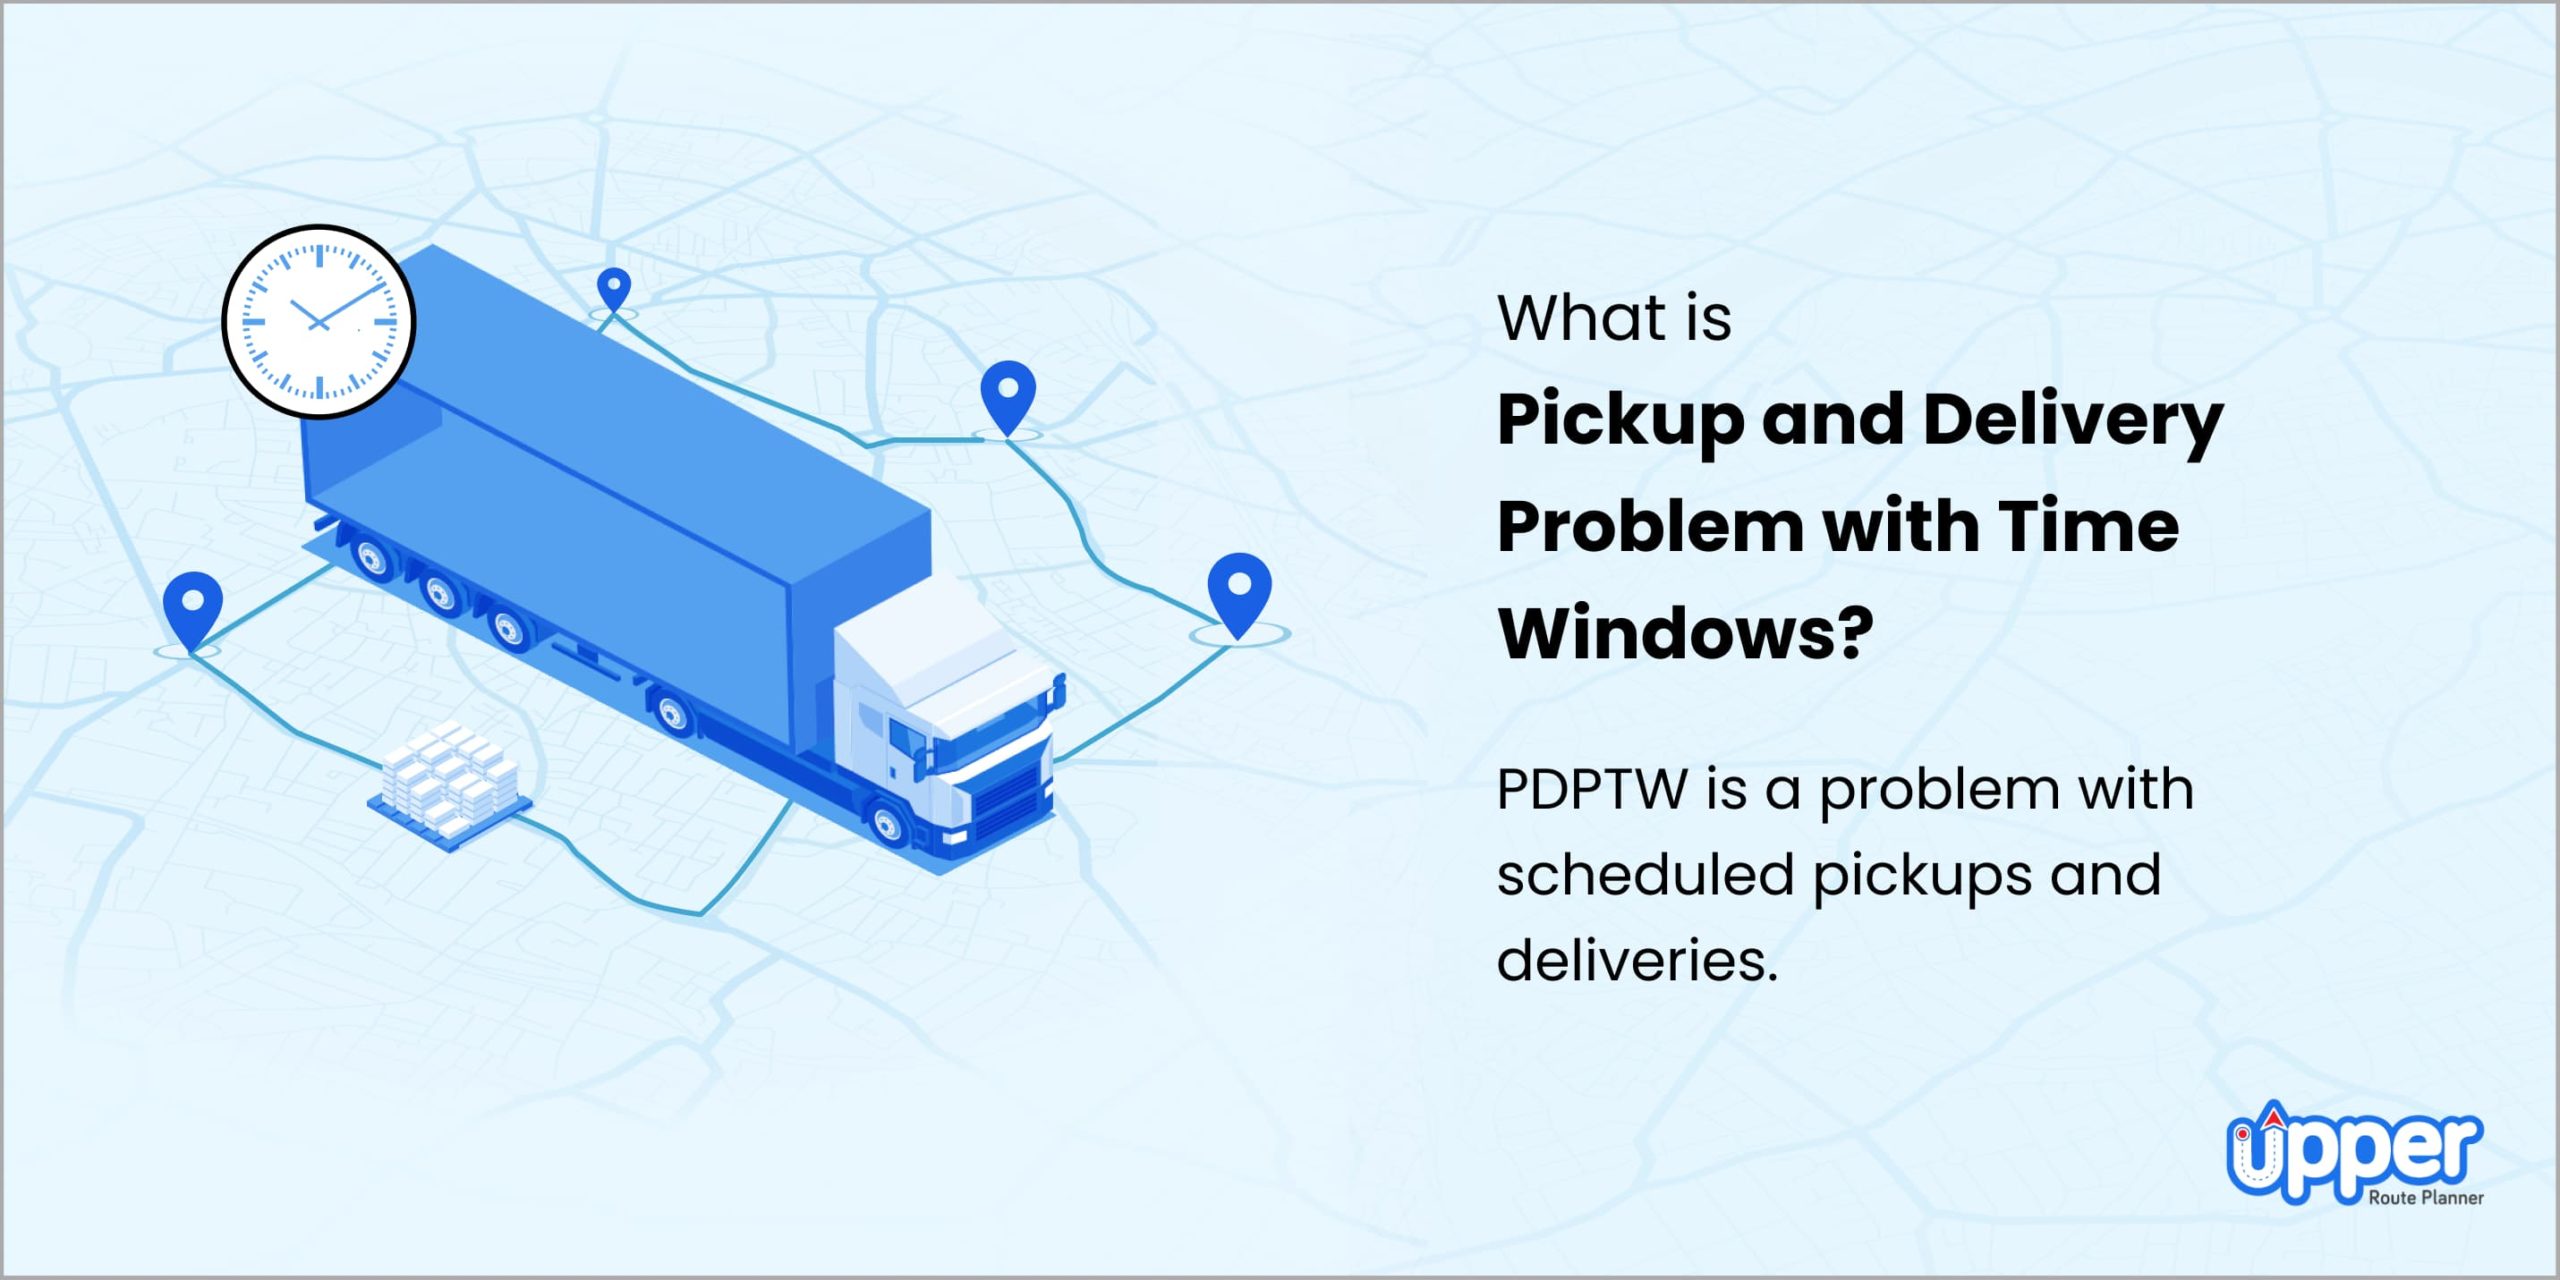 What is pickup and delivery problem with time windows